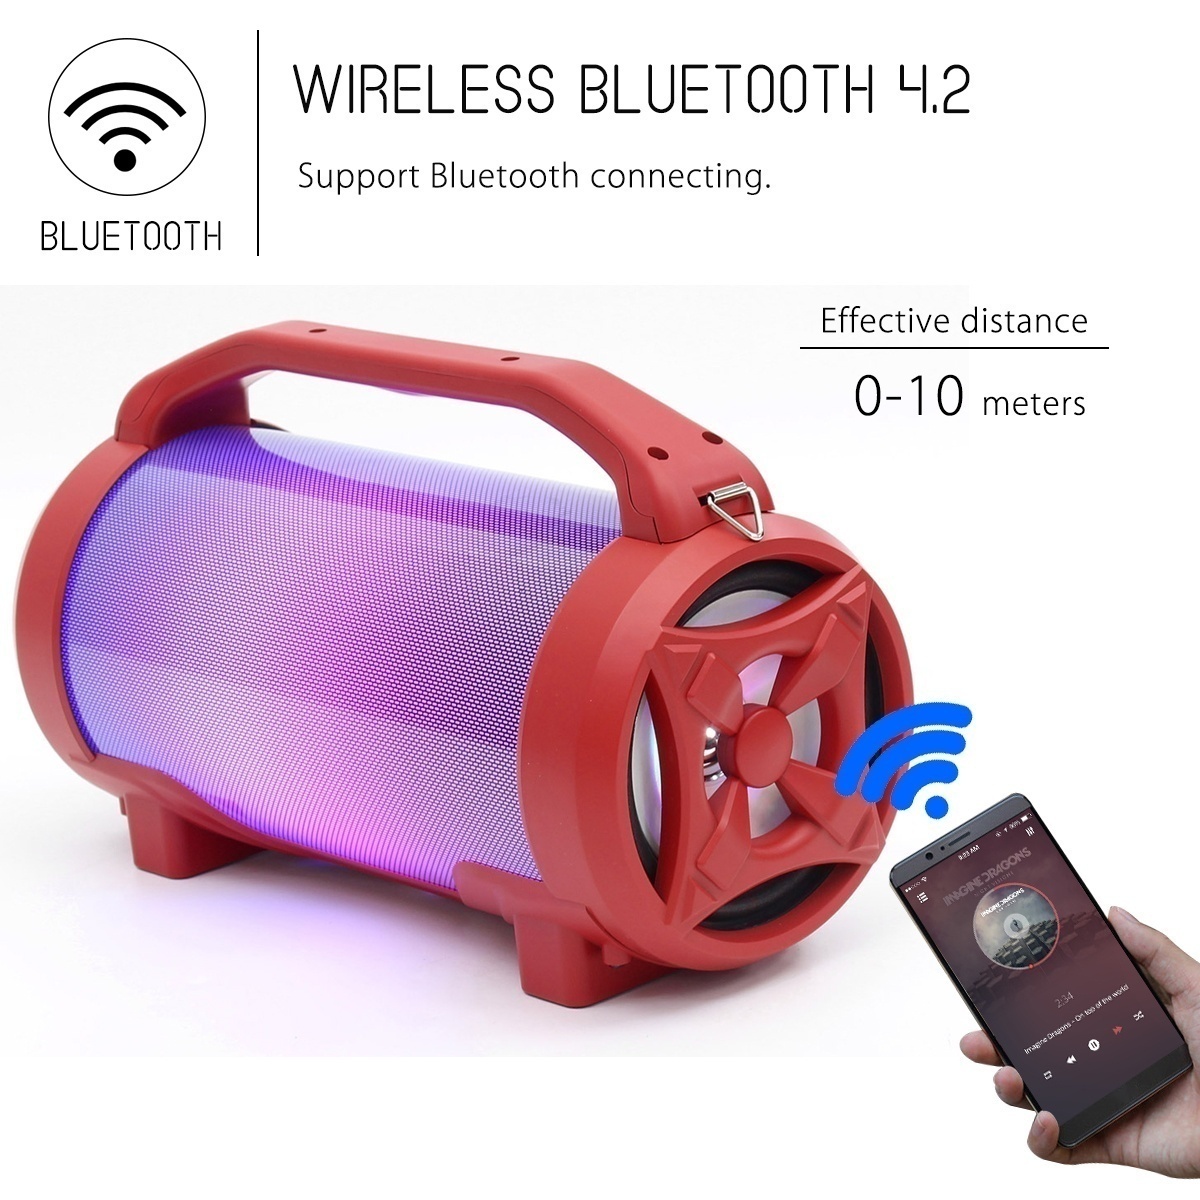 Bakeey-Portable-Wireless-bluetooth-Stereo-Speaker-With-TF-Card-Player-FM-Radio-For-Tablet-Smartphone-1637582-3